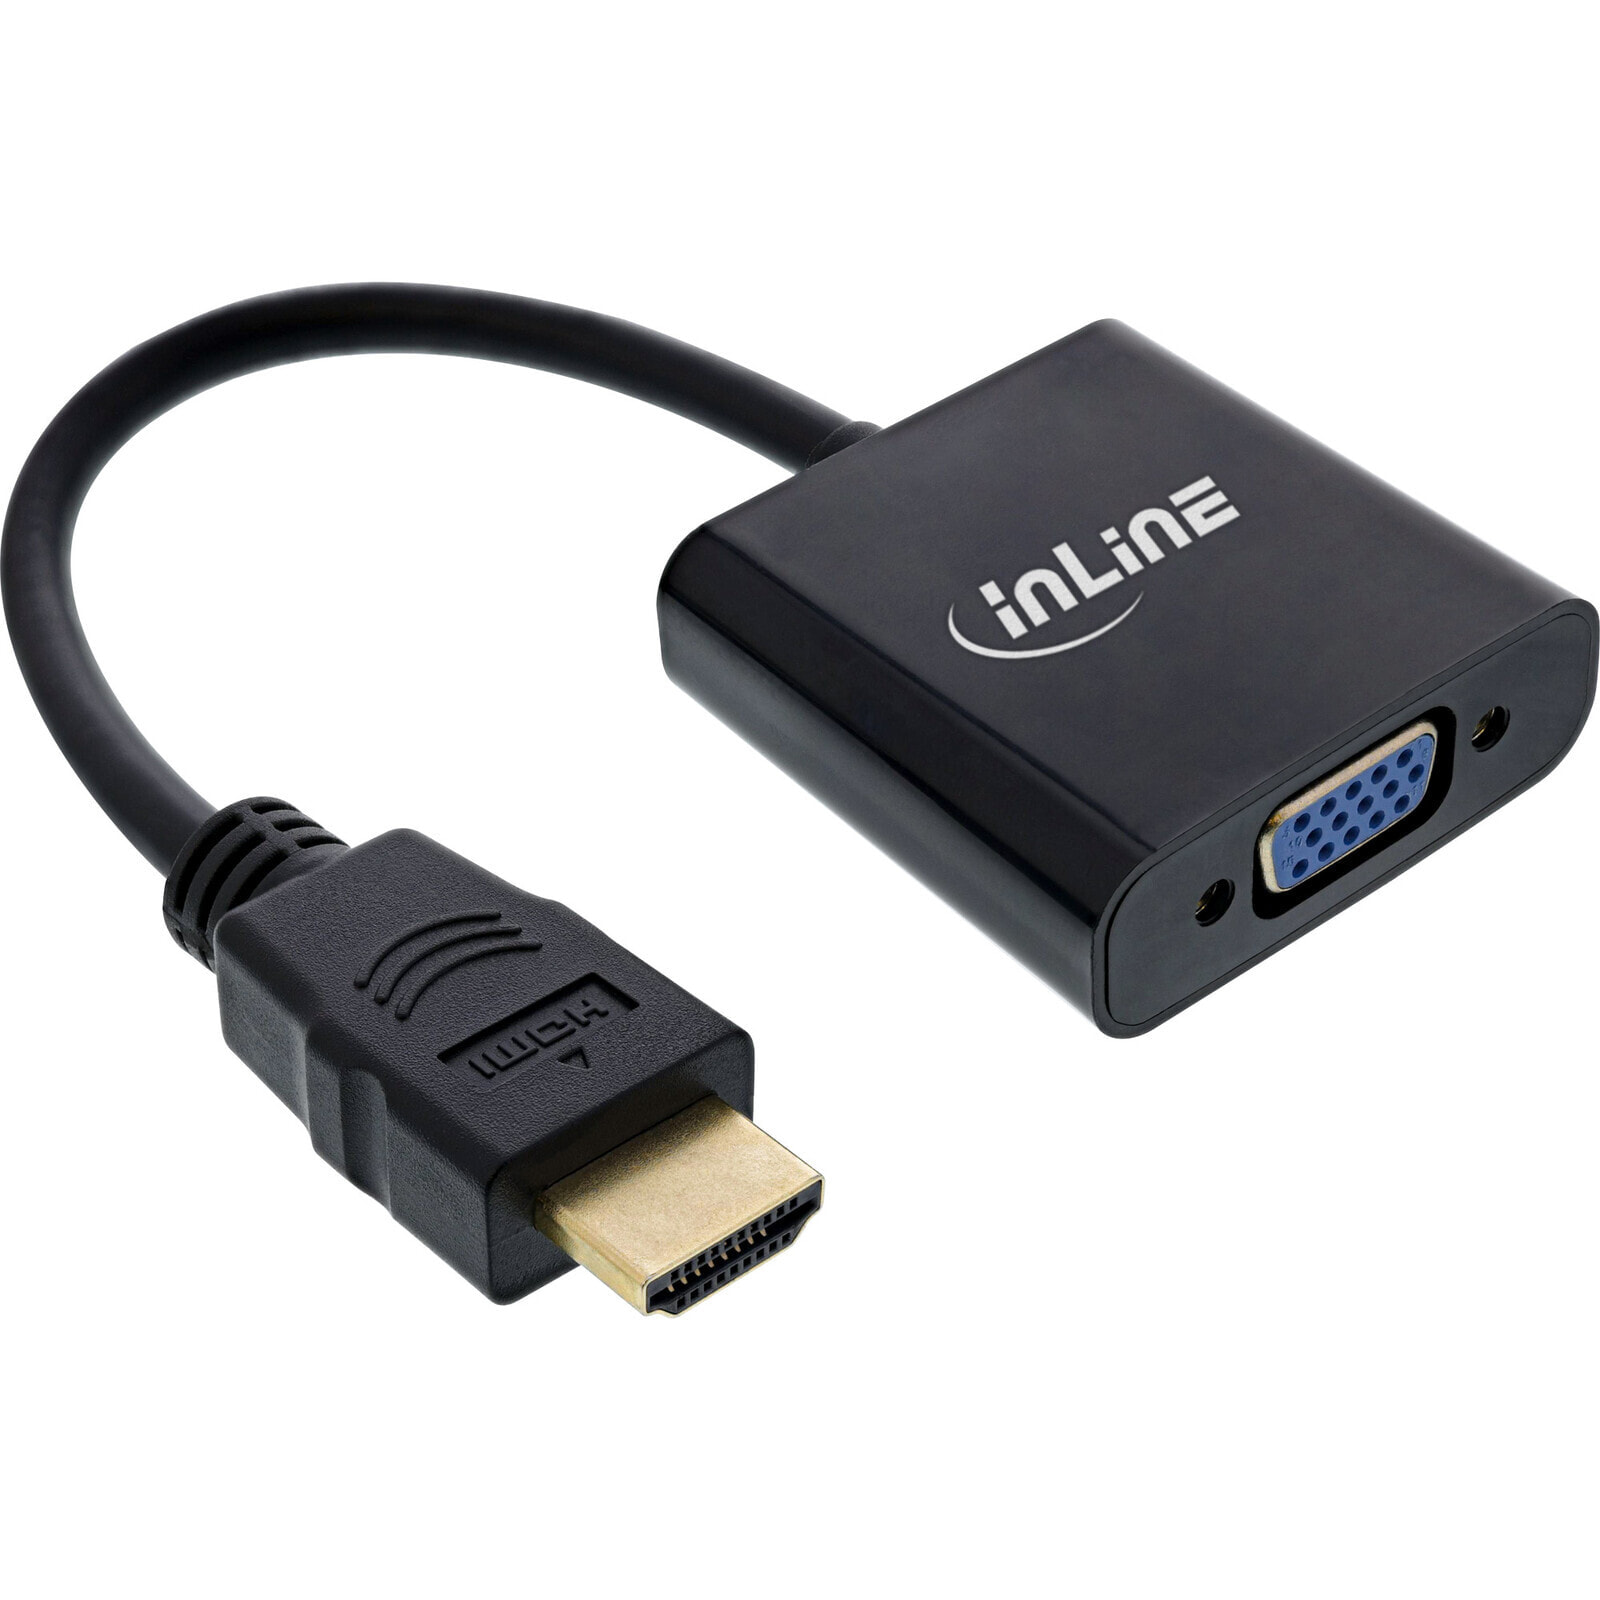 InLine Converter Cable HDMI to VGA - with Audio - Active video converter - Black - Plastic - 0.1 m - 1920 x 1080 pixels - 1280 x 1024,1600 x 1200,1920 x 1080